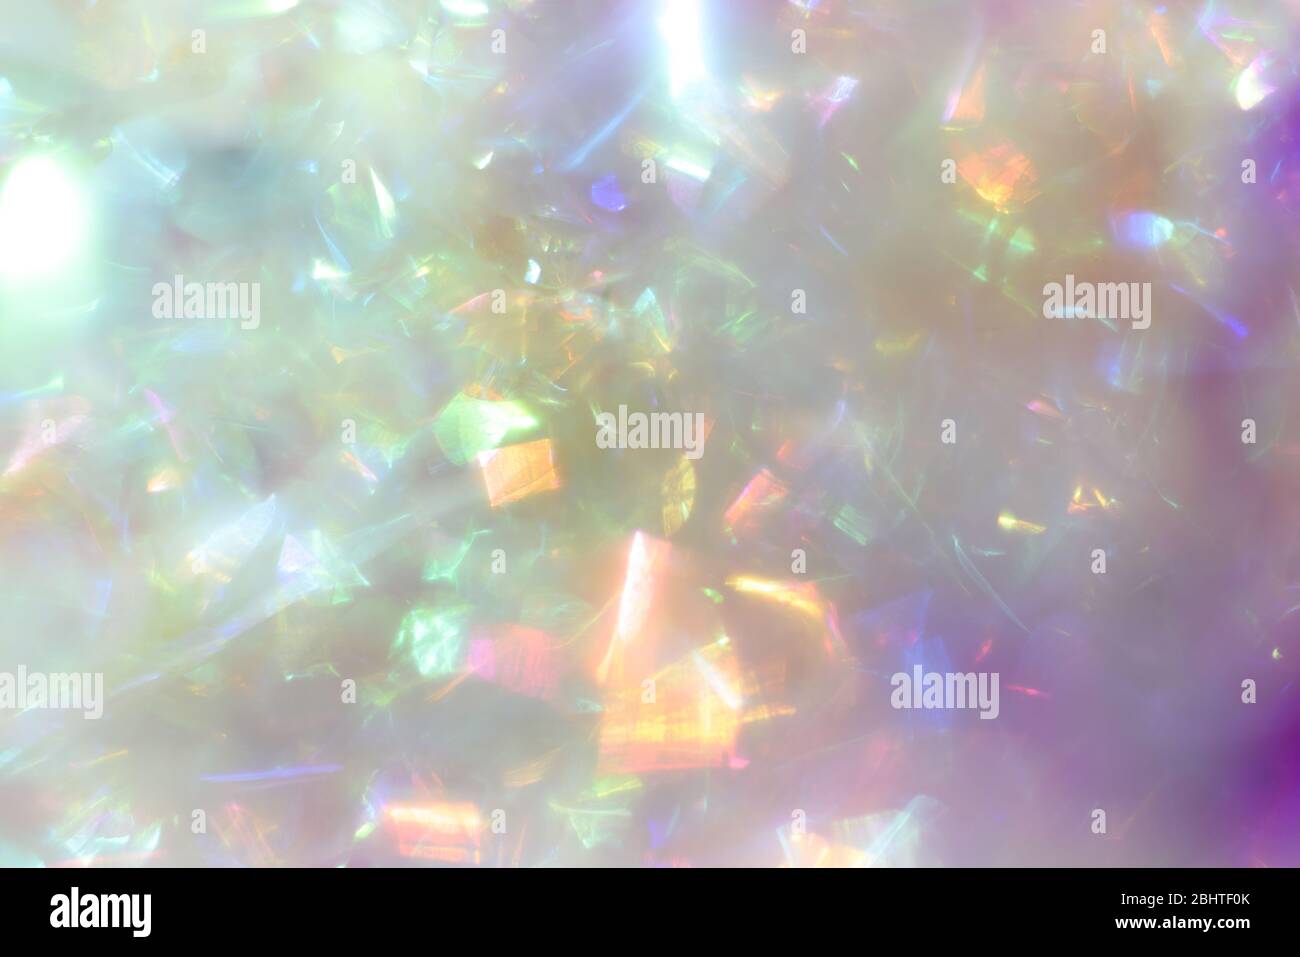 Colorful bright holiday confetti glitter macro abstract texture background  Stock Photo - Alamy